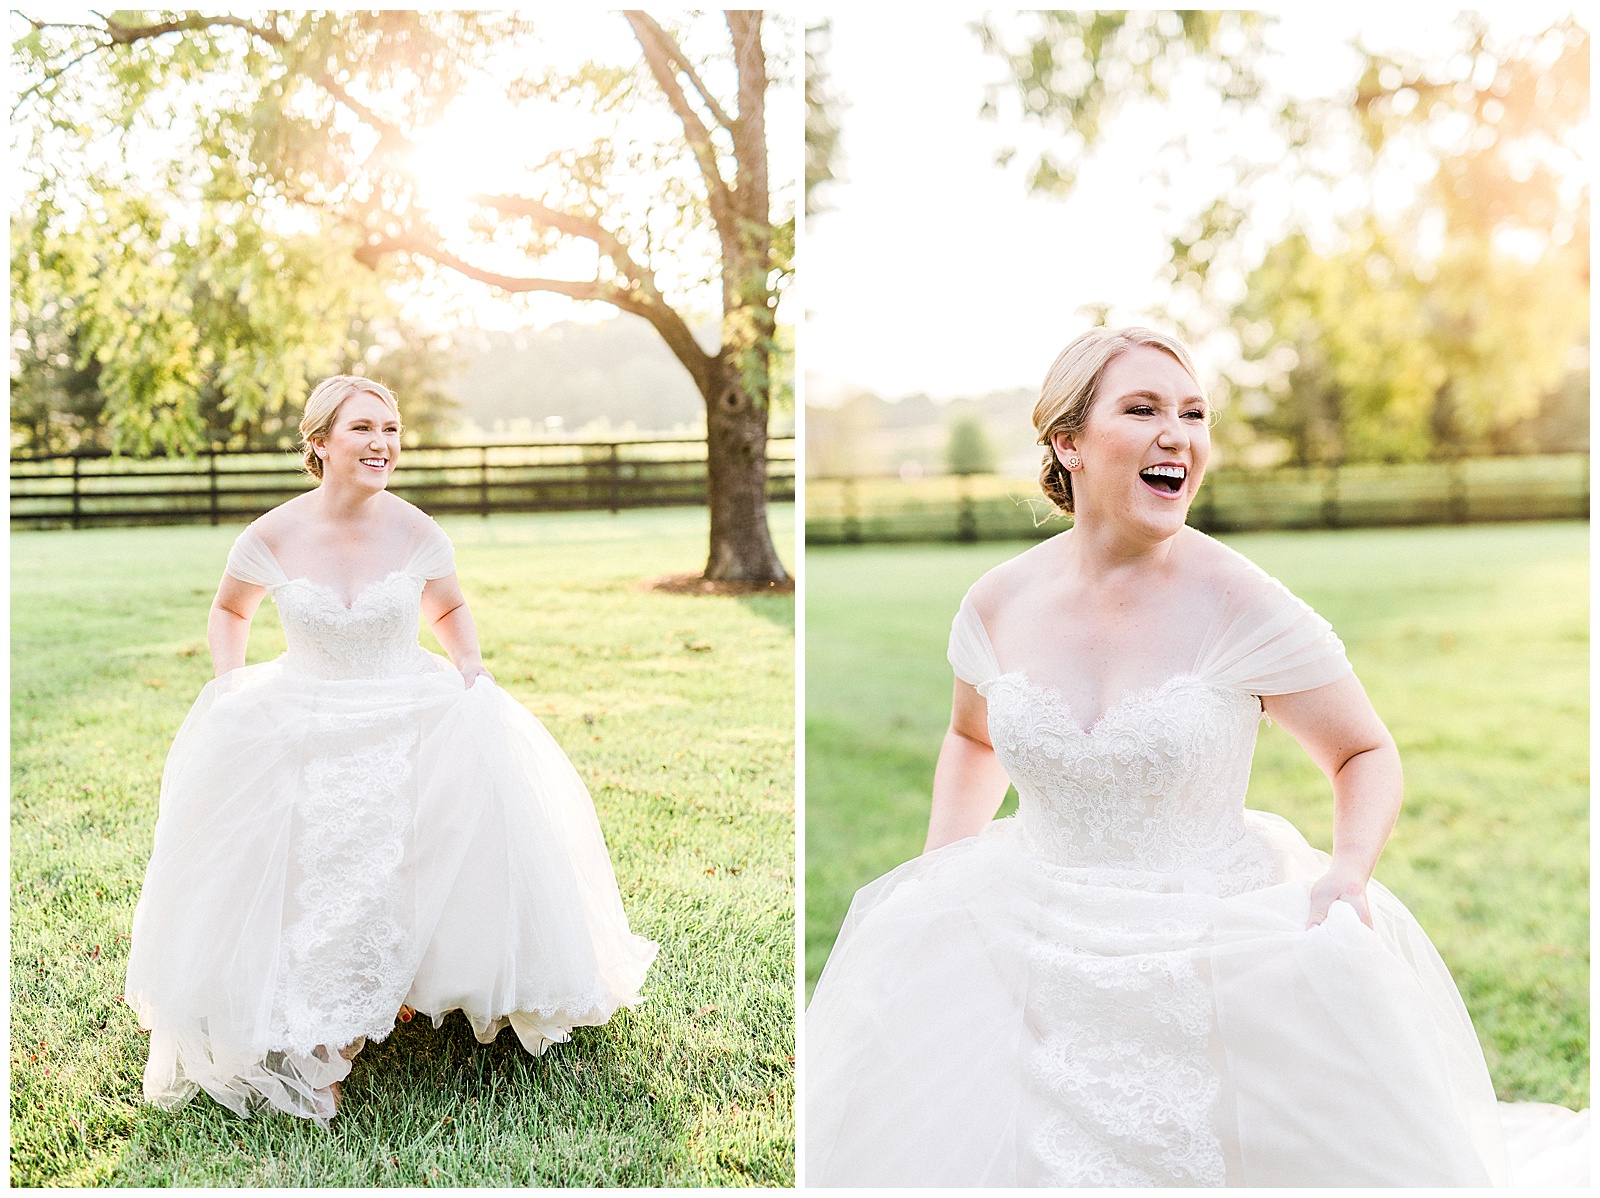 Dreamy Elegant Bridal Portraits in Charlotte, NC with Olivia | Kevyn Dixon Photography | Check out the rest of the shoot at http://kevyndixonphoto.com/blog/